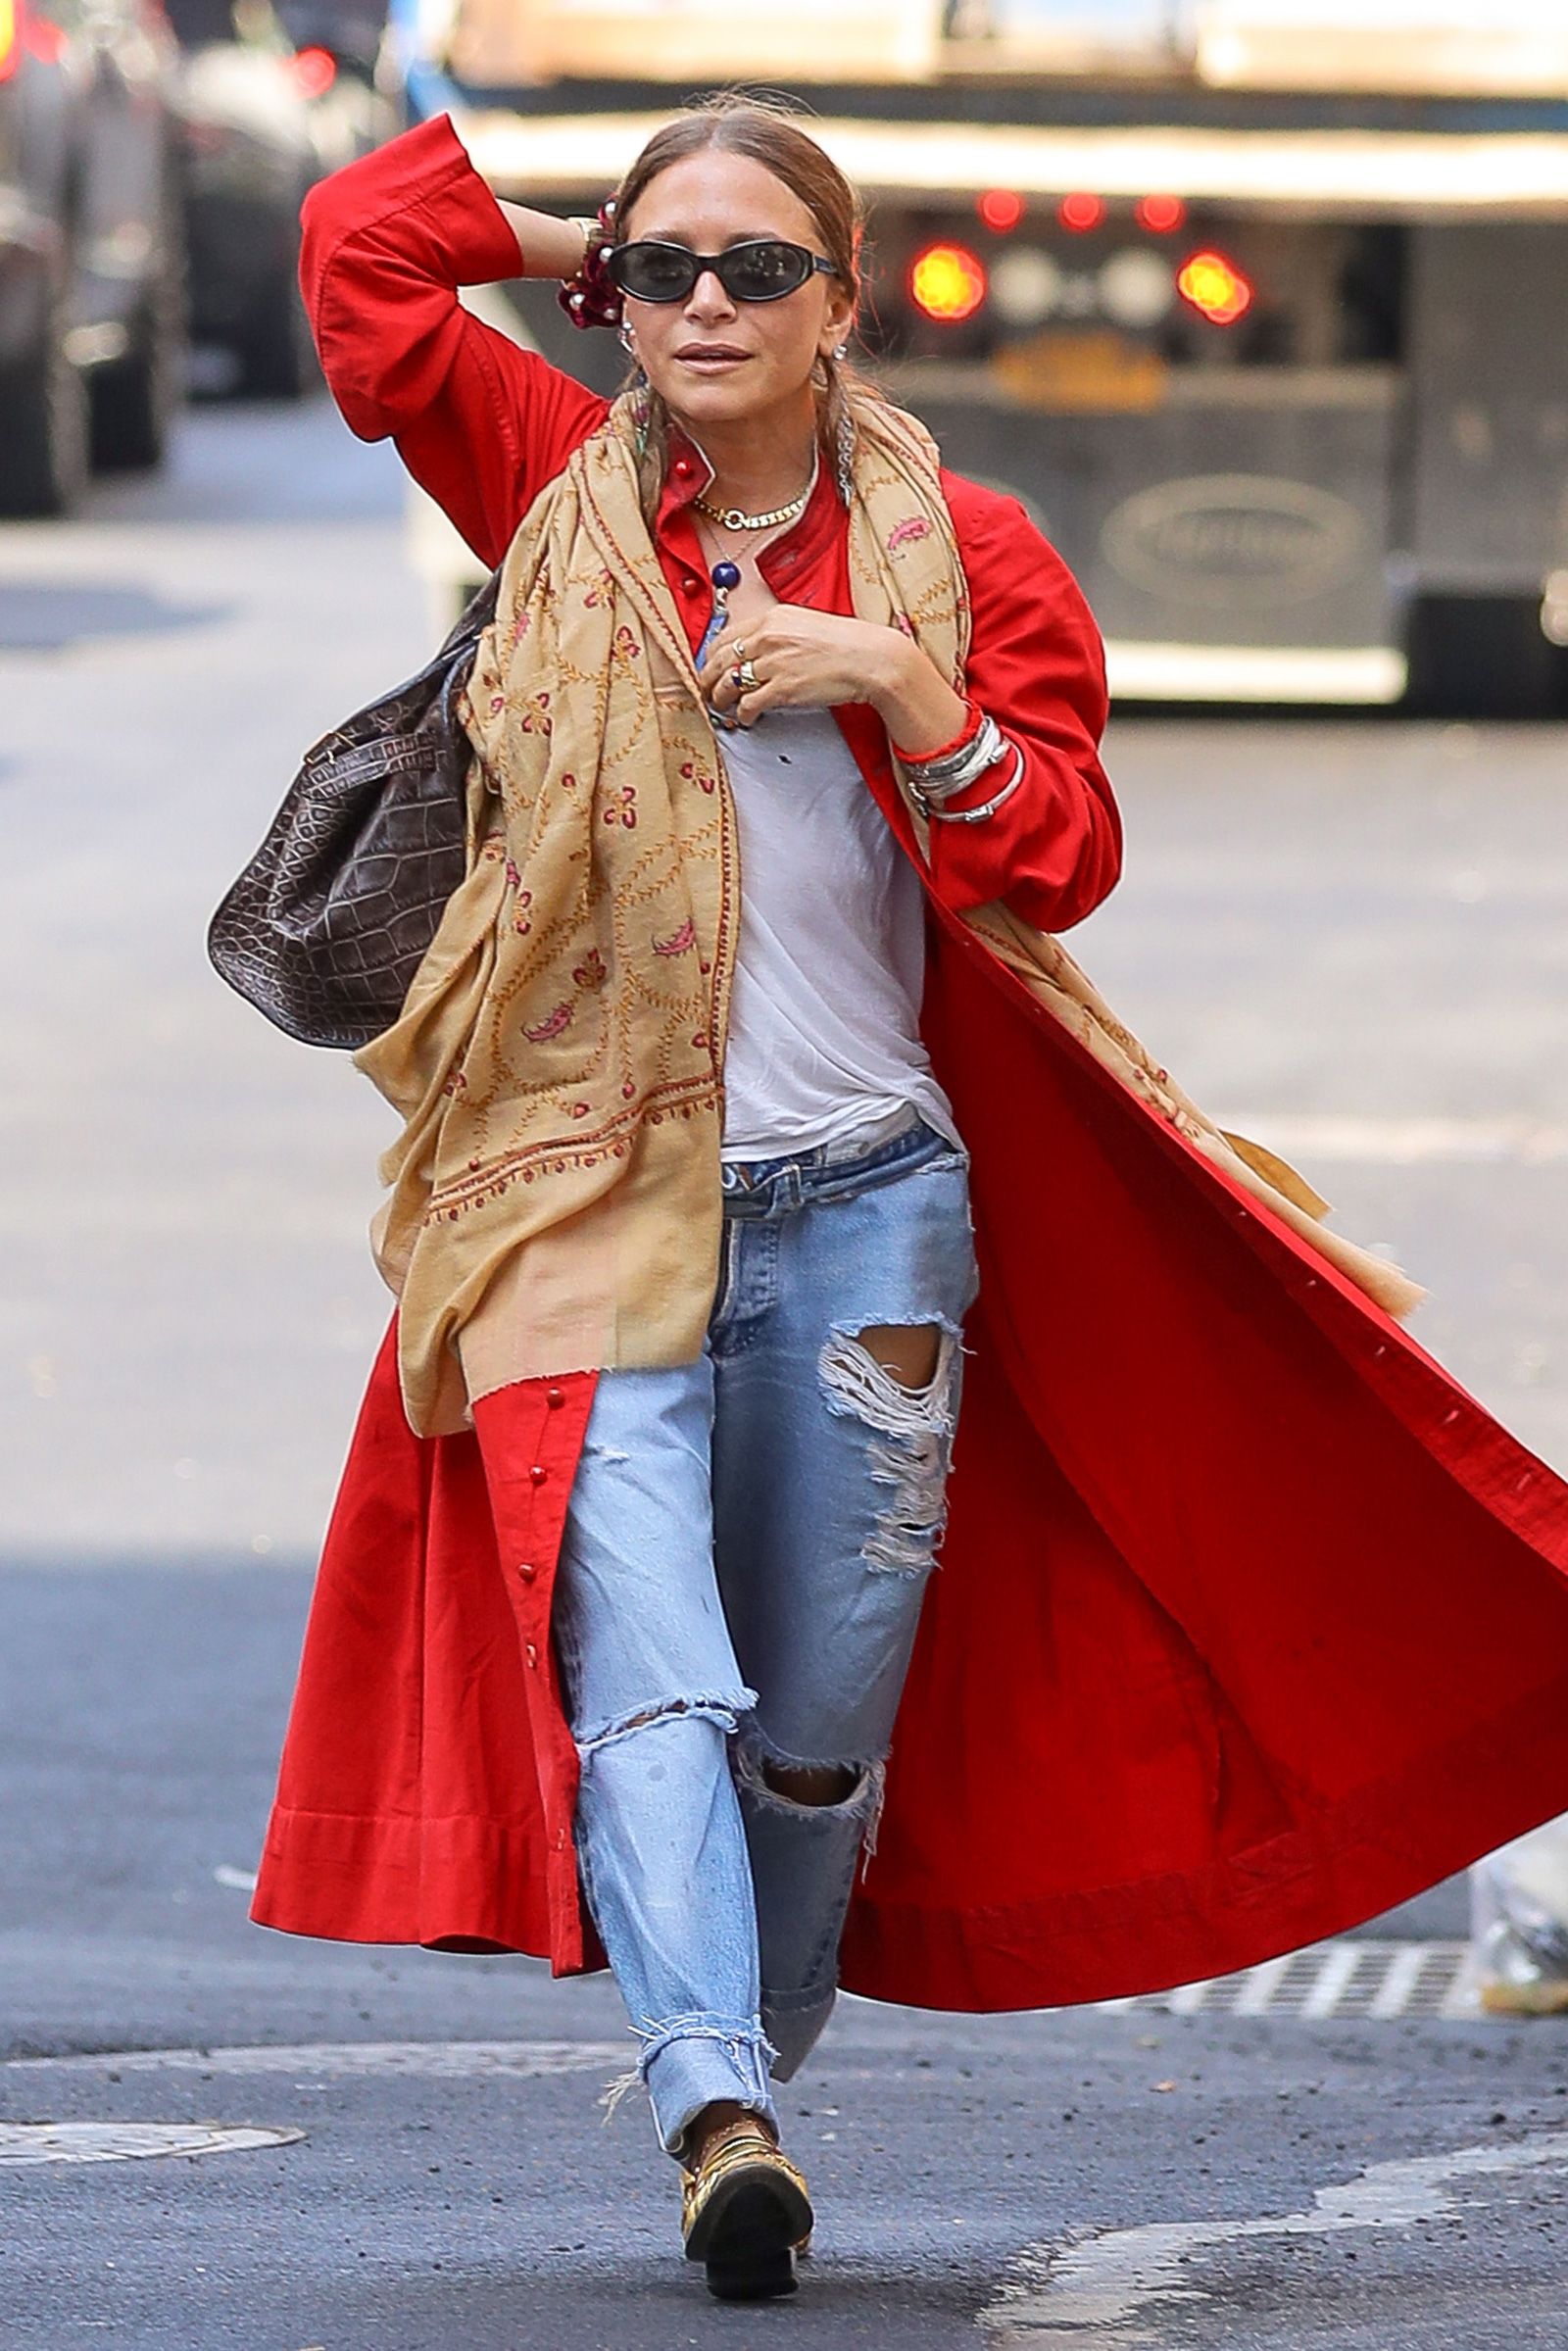 Mary-Kate Olsen makes rare appearance in colorful outfit | CNN